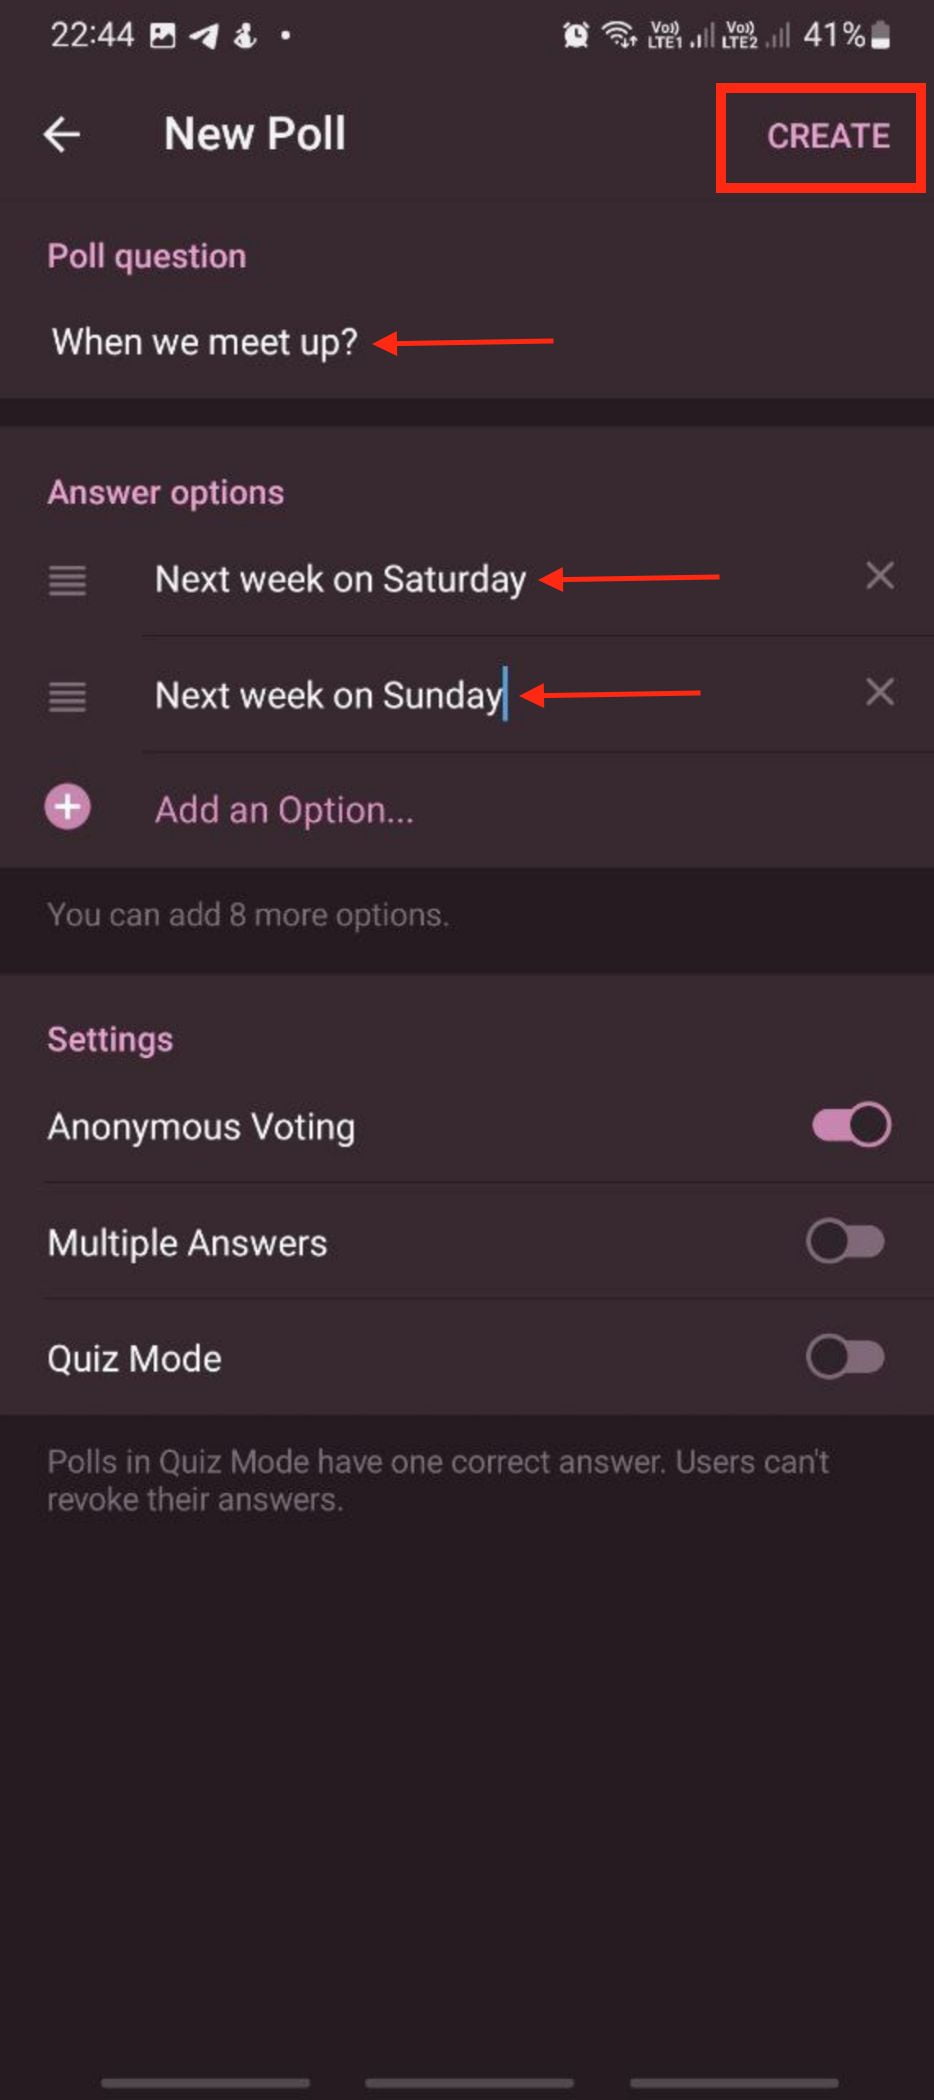 How to Create a Poll in Telegram on Android